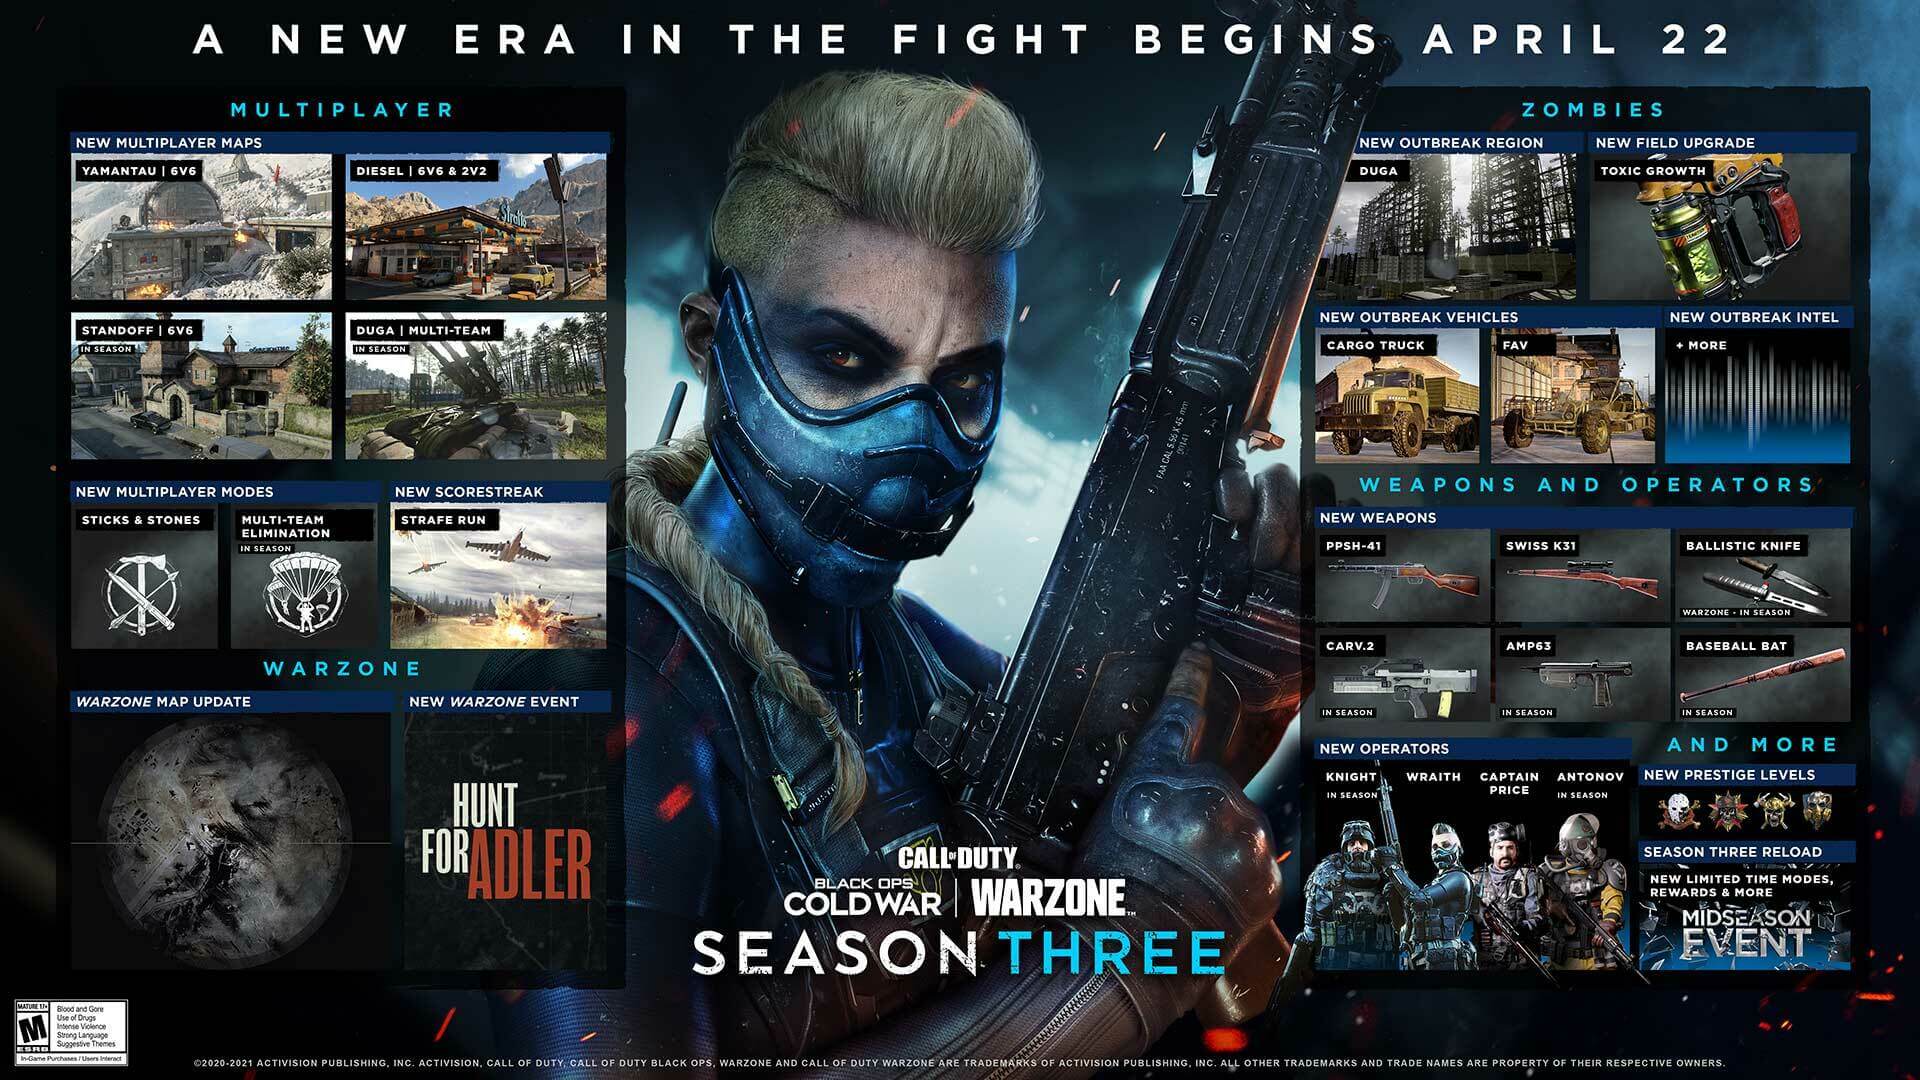 call of duty cold war season 4 release date